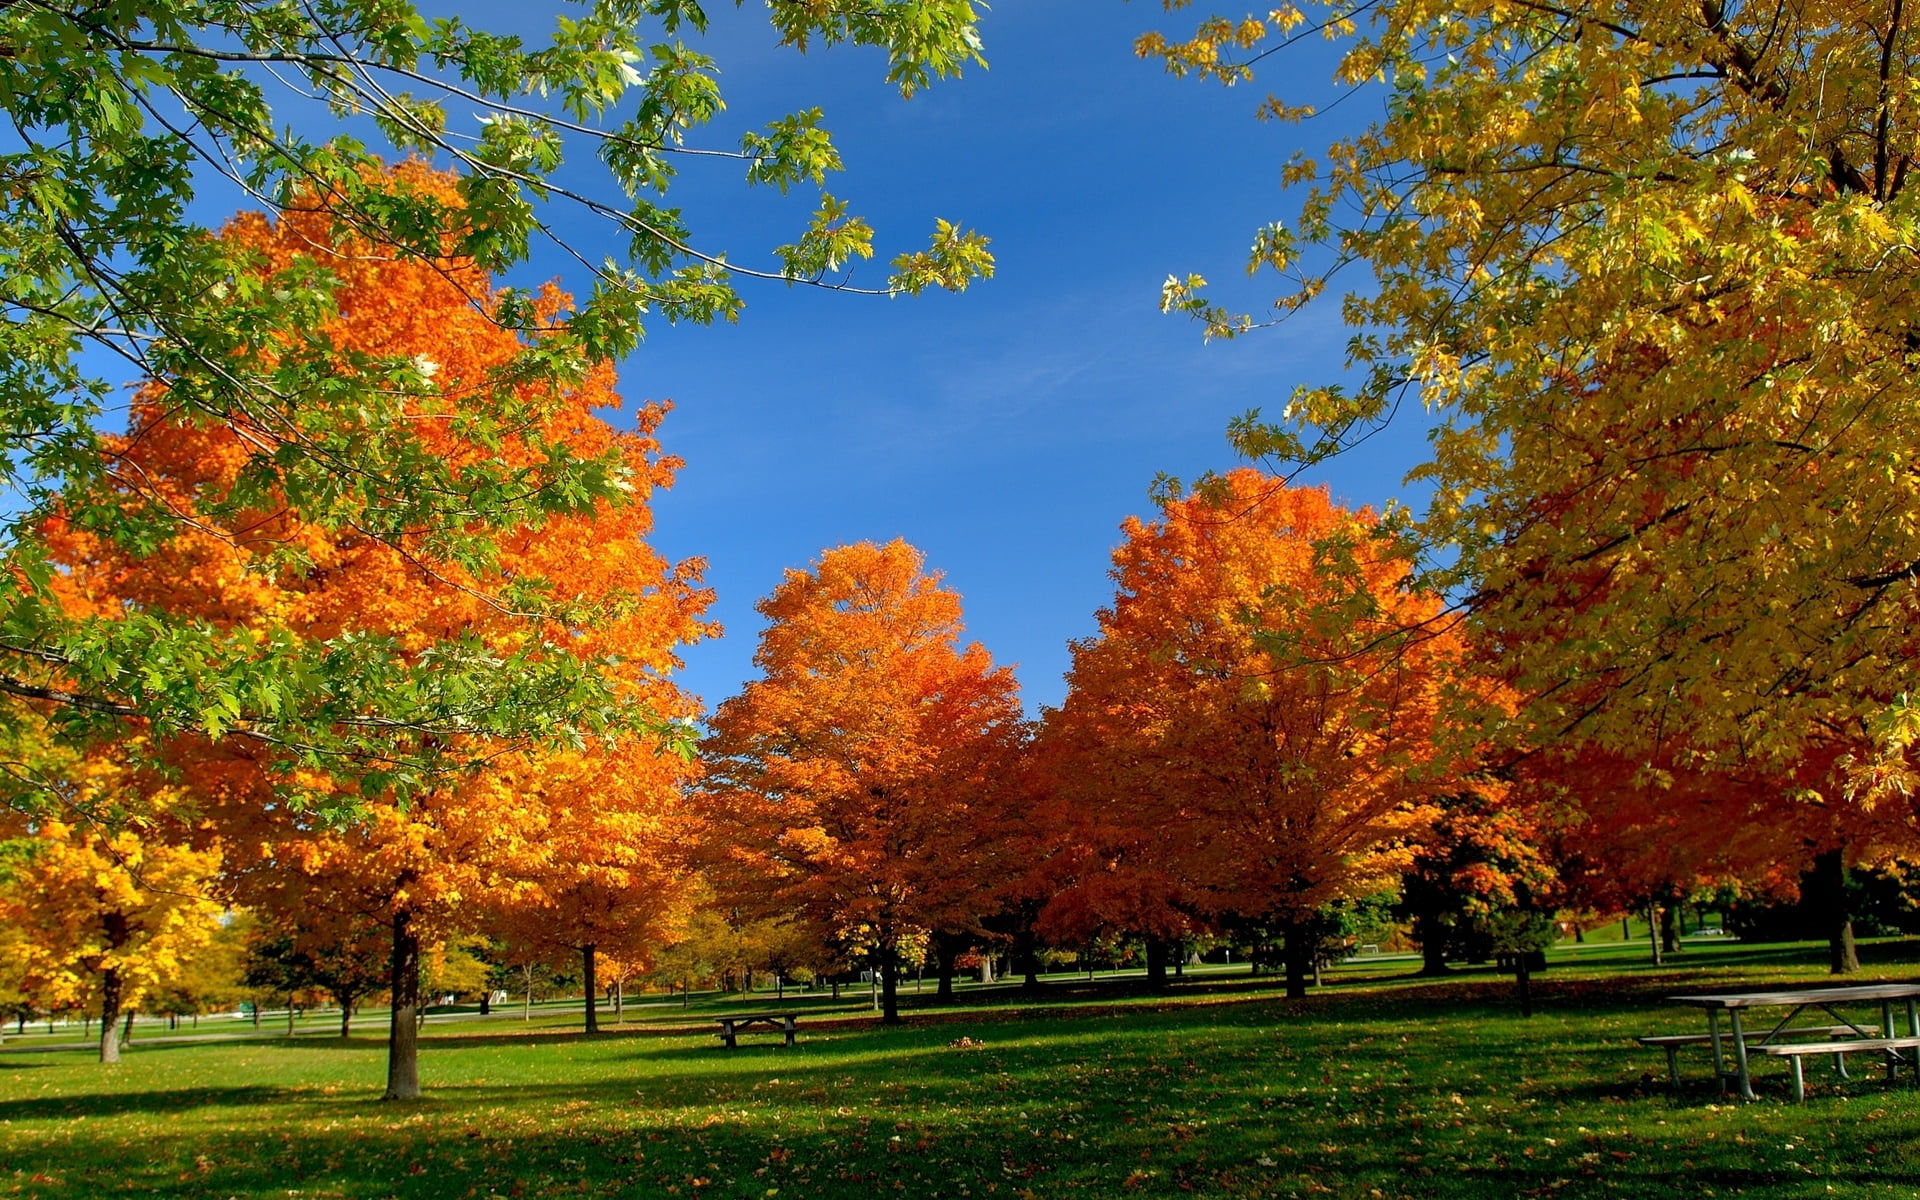 orange leafed trees, park, autumn, grass, leaves, nature, yellow